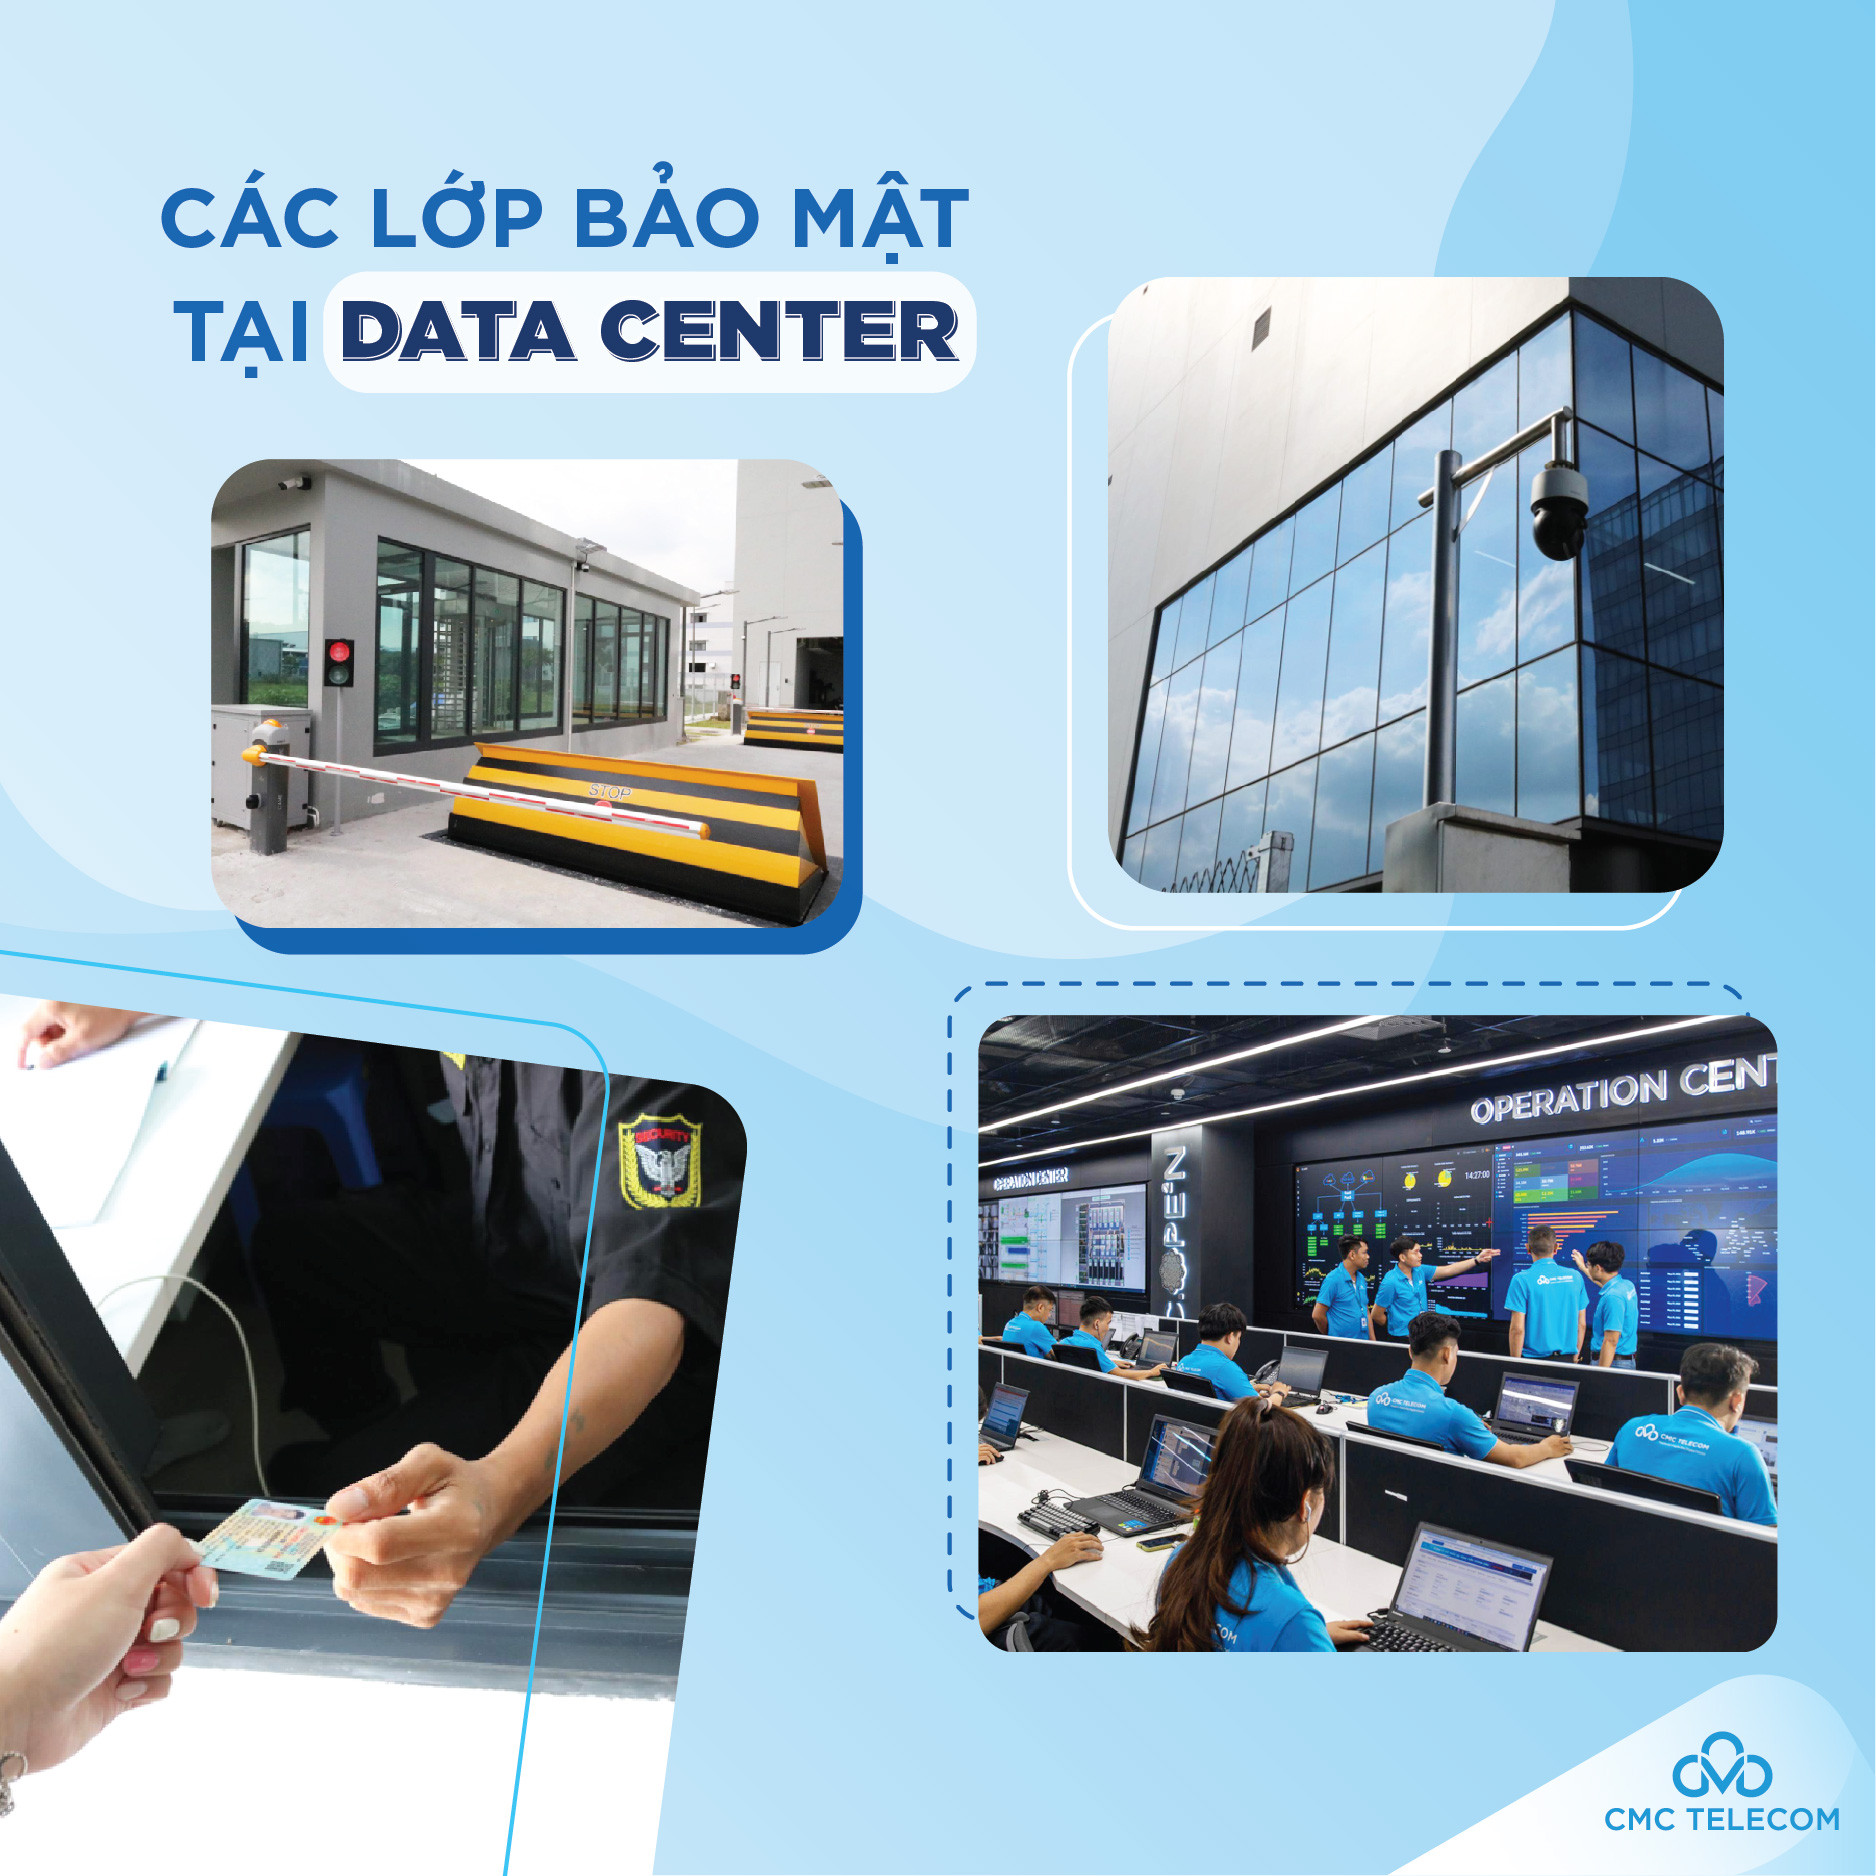 VIETNAM HAS ITS FIRST DATA CENTER THAT MEETS LEVEL 4 INFORMATION SYSTEM SECURITY STANDARDS